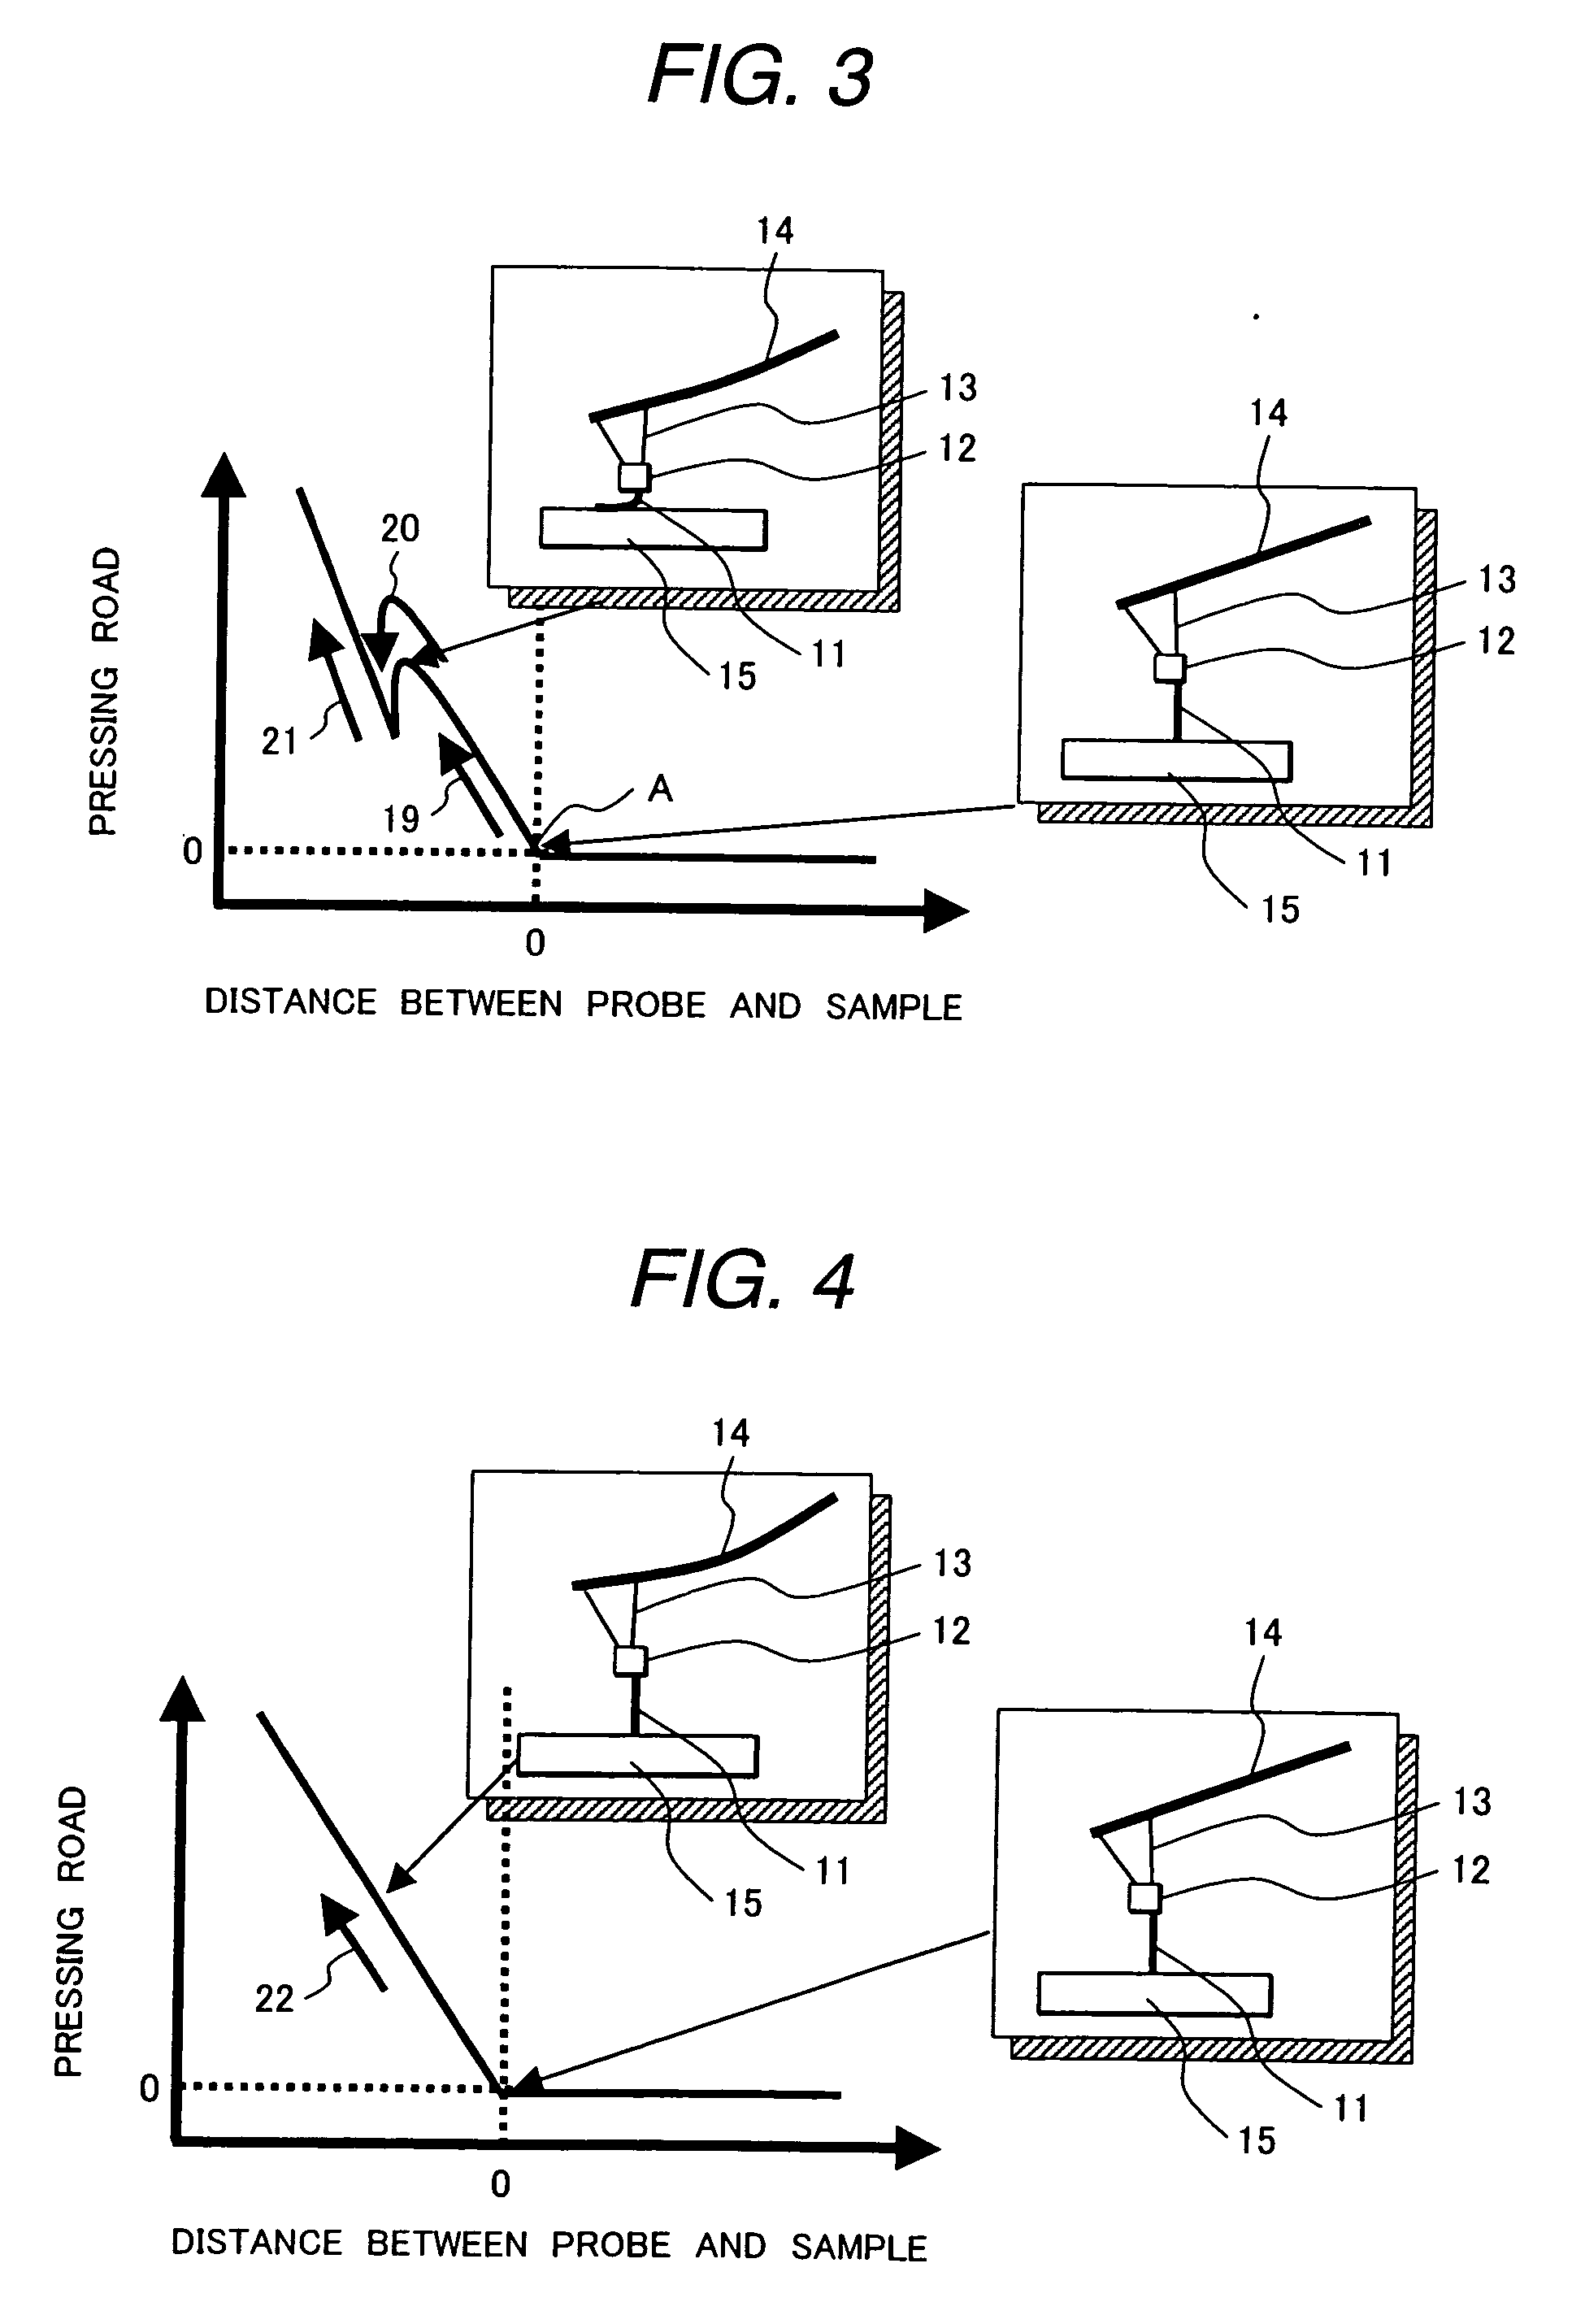 Cantilever and inspecting apparatus